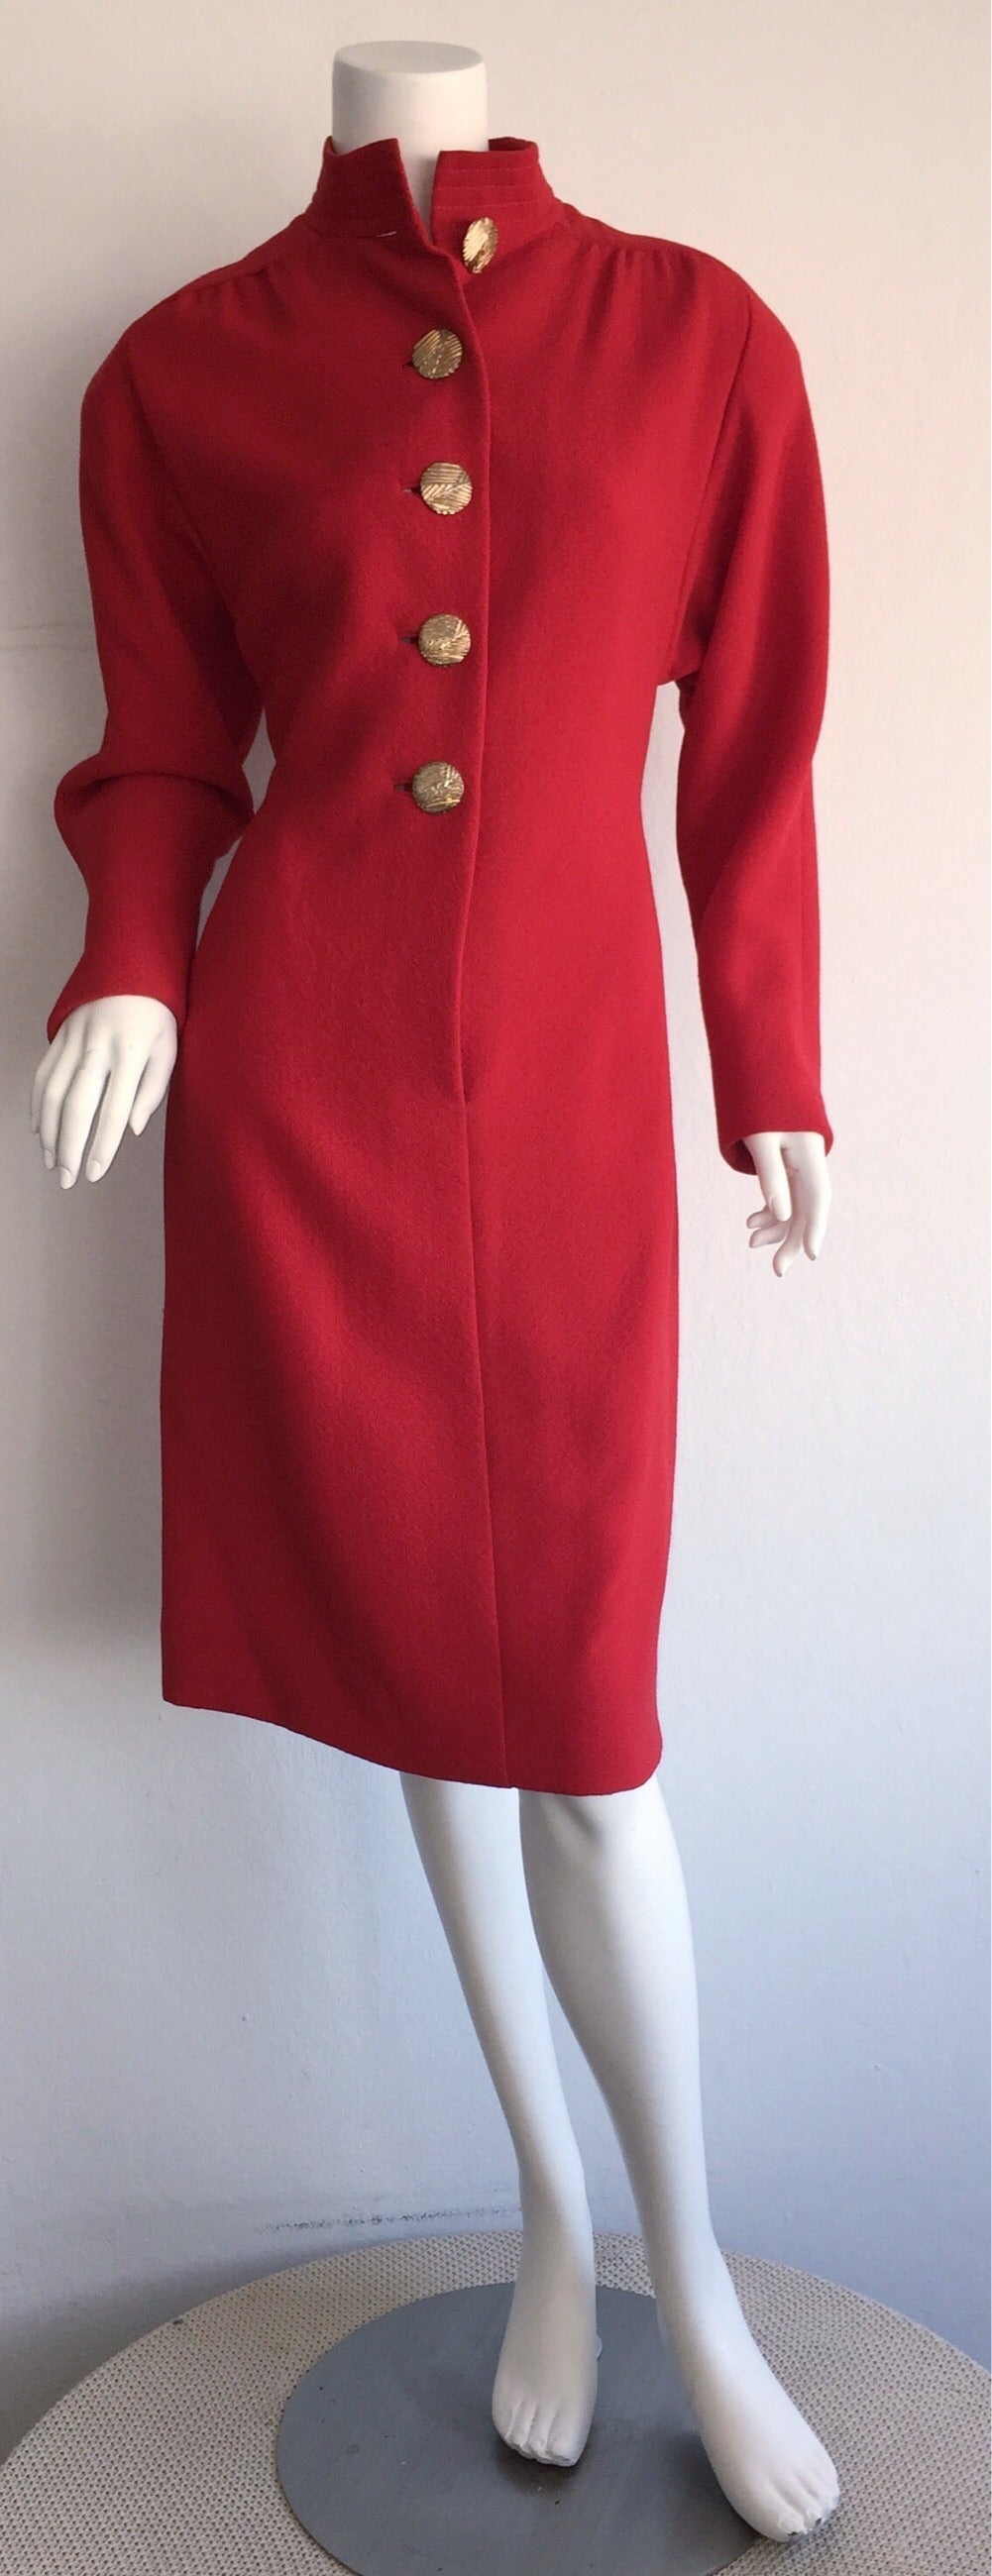 Beautiful Vintage James Galanos Lipstick Red Dress, w/ Gold Buttons 1